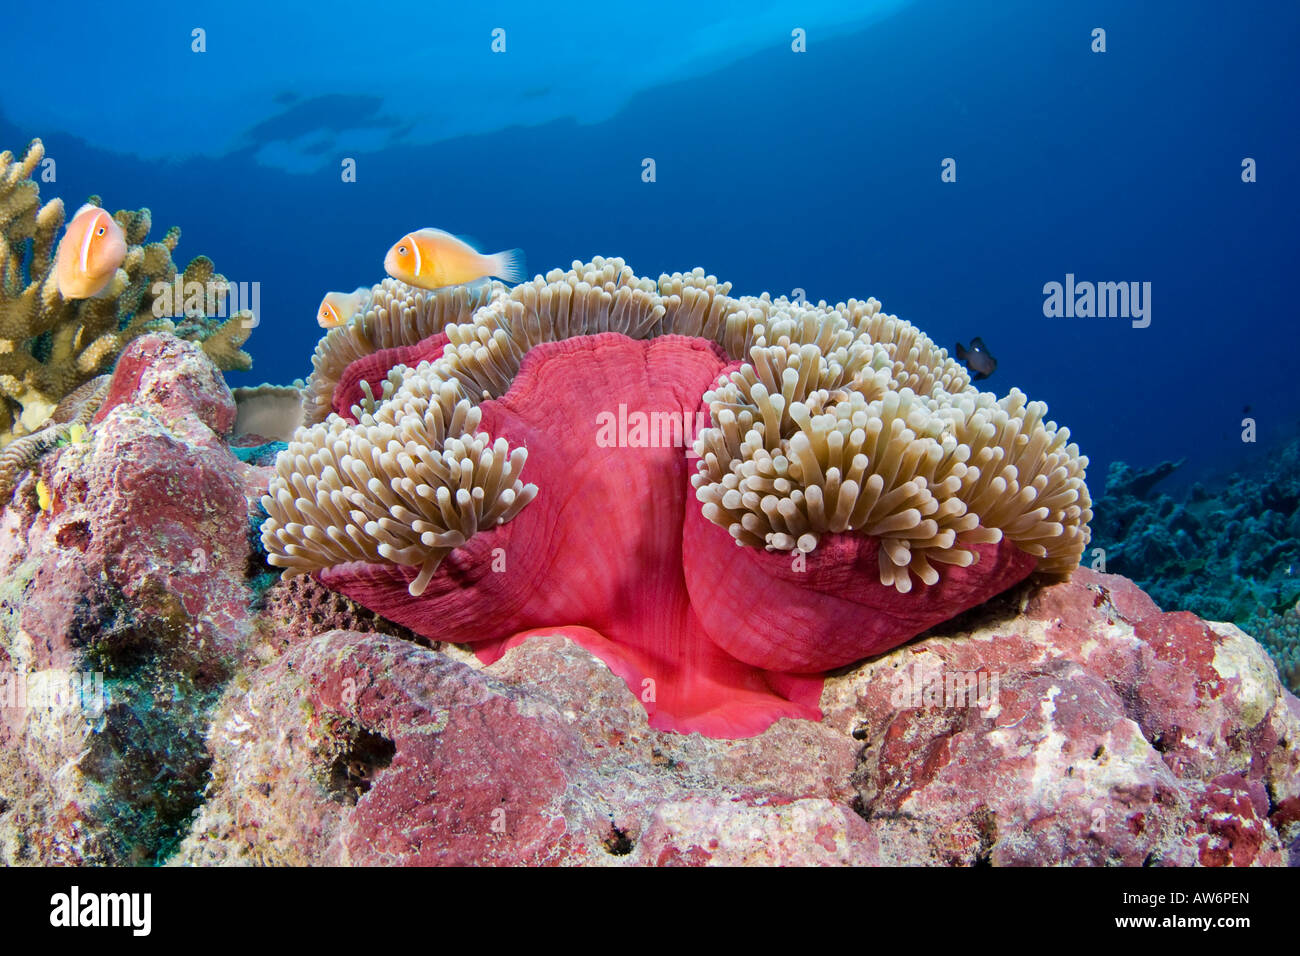 Anemonefish, Amphiprion perideraion, with the anemone, Heteractis magnifica, Yap, Micronesia. Stock Photo